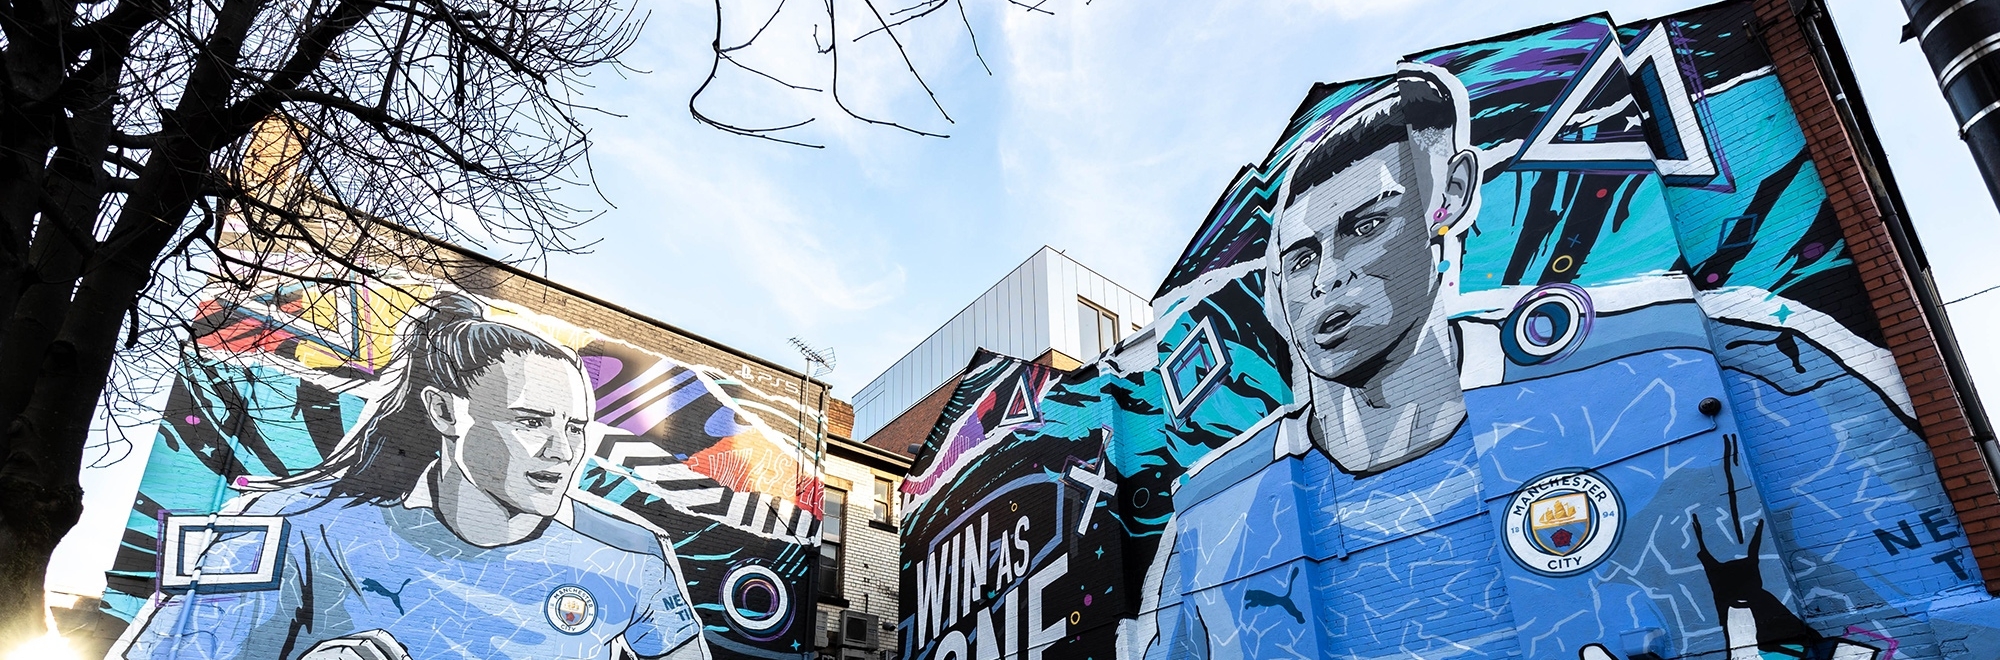 EA scores with a mural campaign by Kinetic and Mural Republic for FIFA 21 and PS5